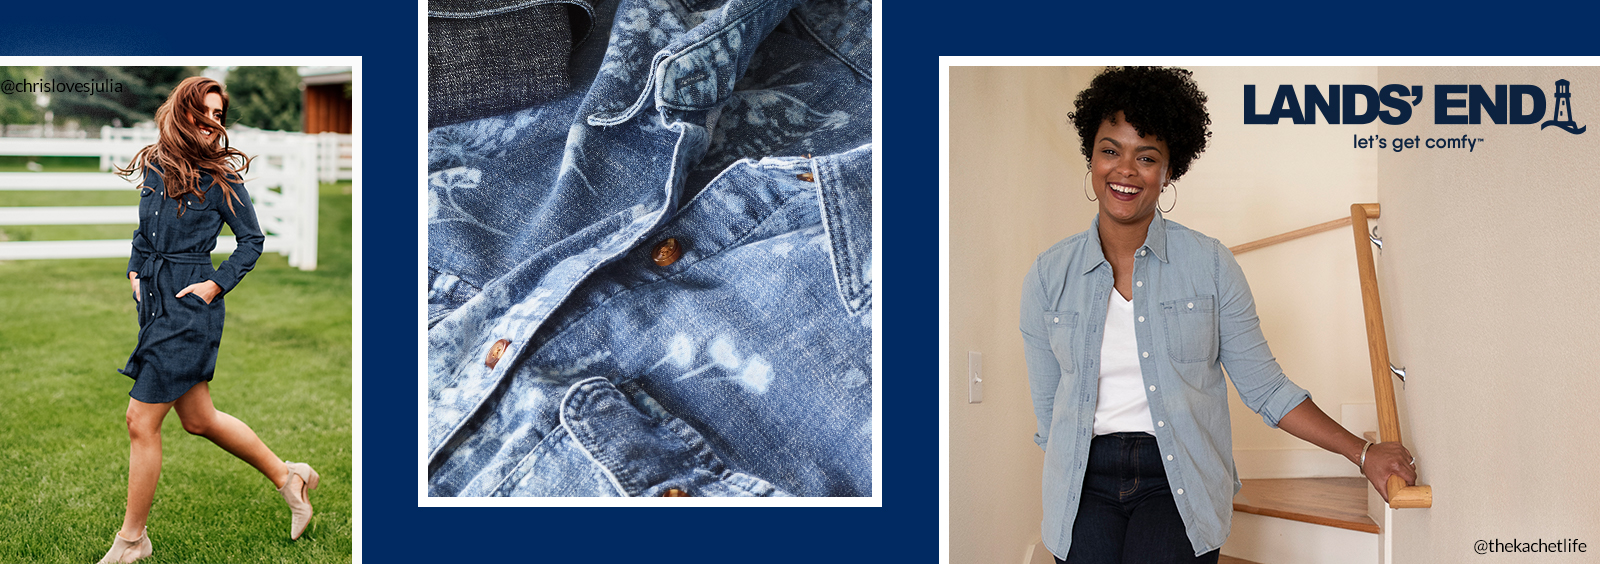 Chambray vs. Denim: What's the Difference?